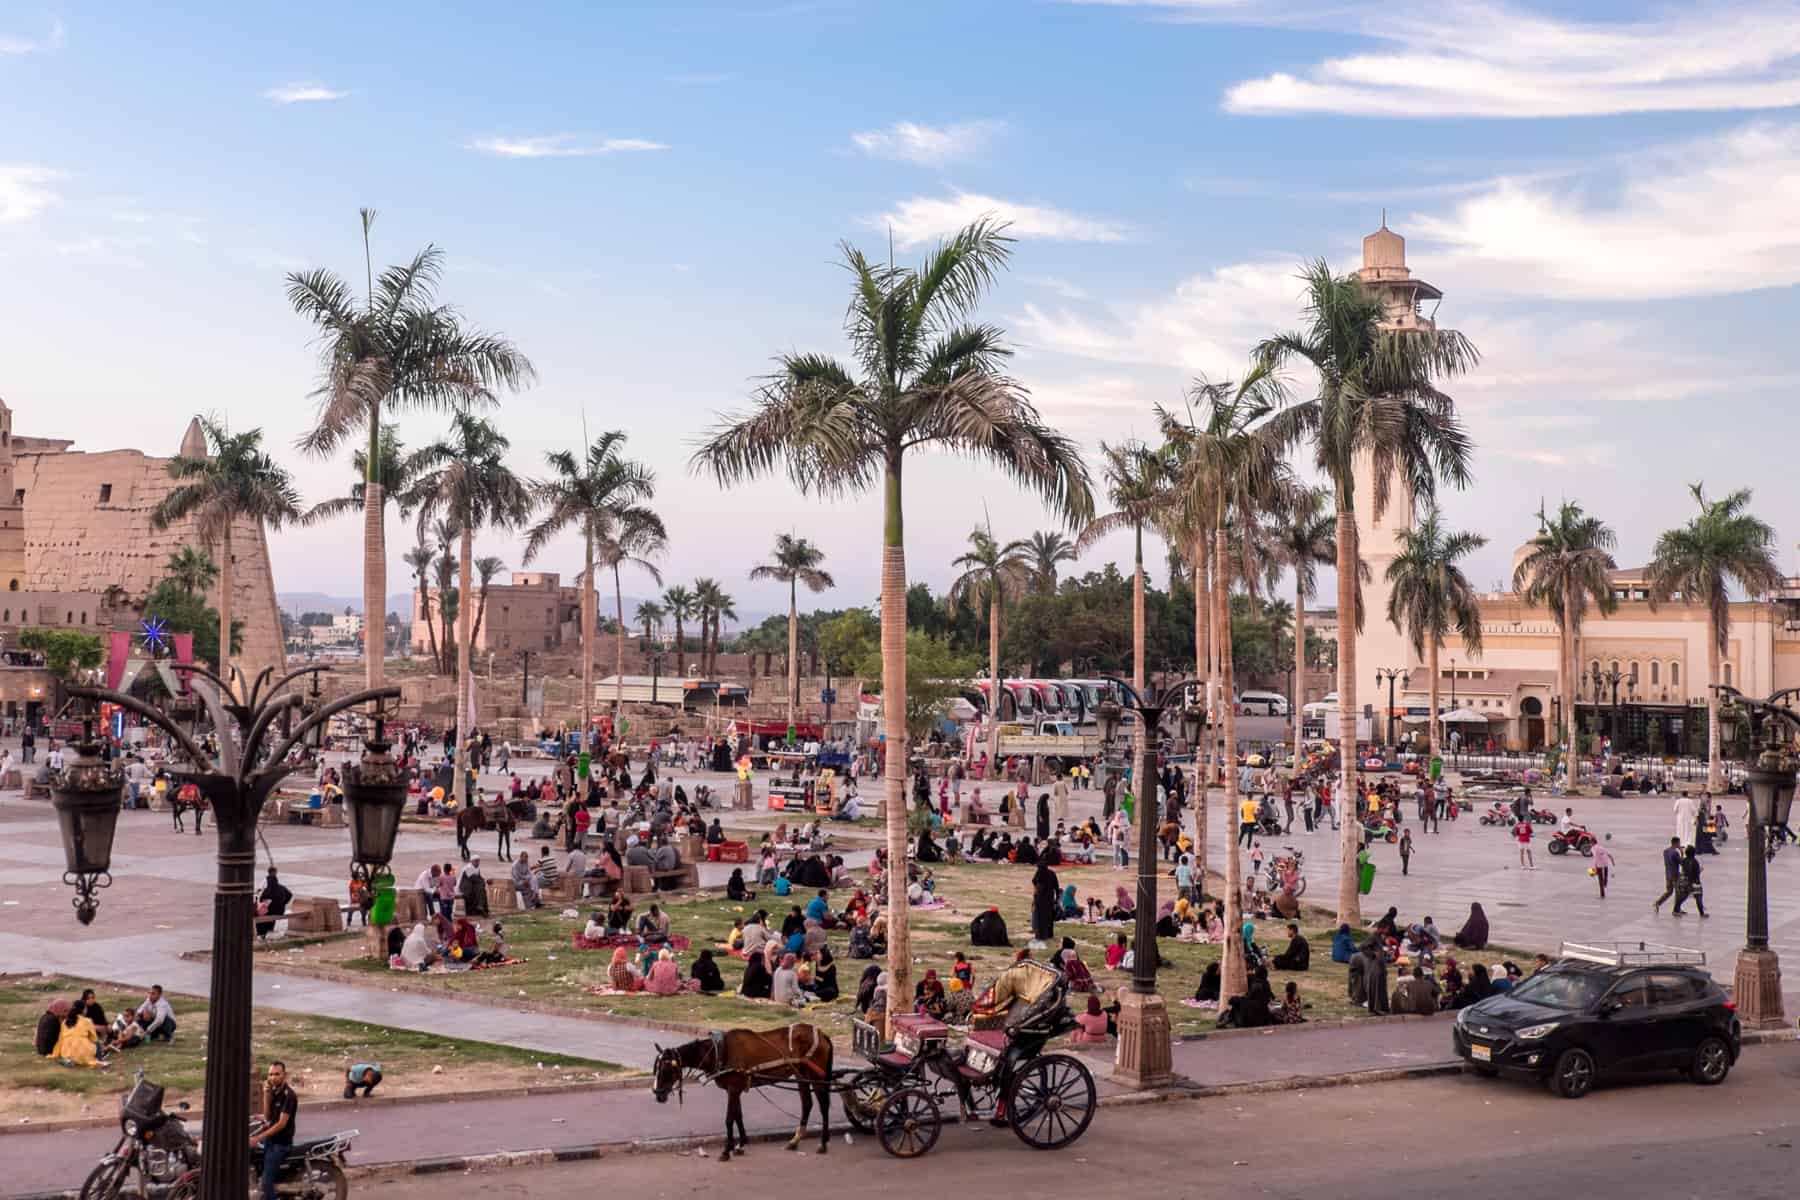 A public square in front of Luxor Temple in Egypt filled with palm trees, horse and. carts, crowds of people